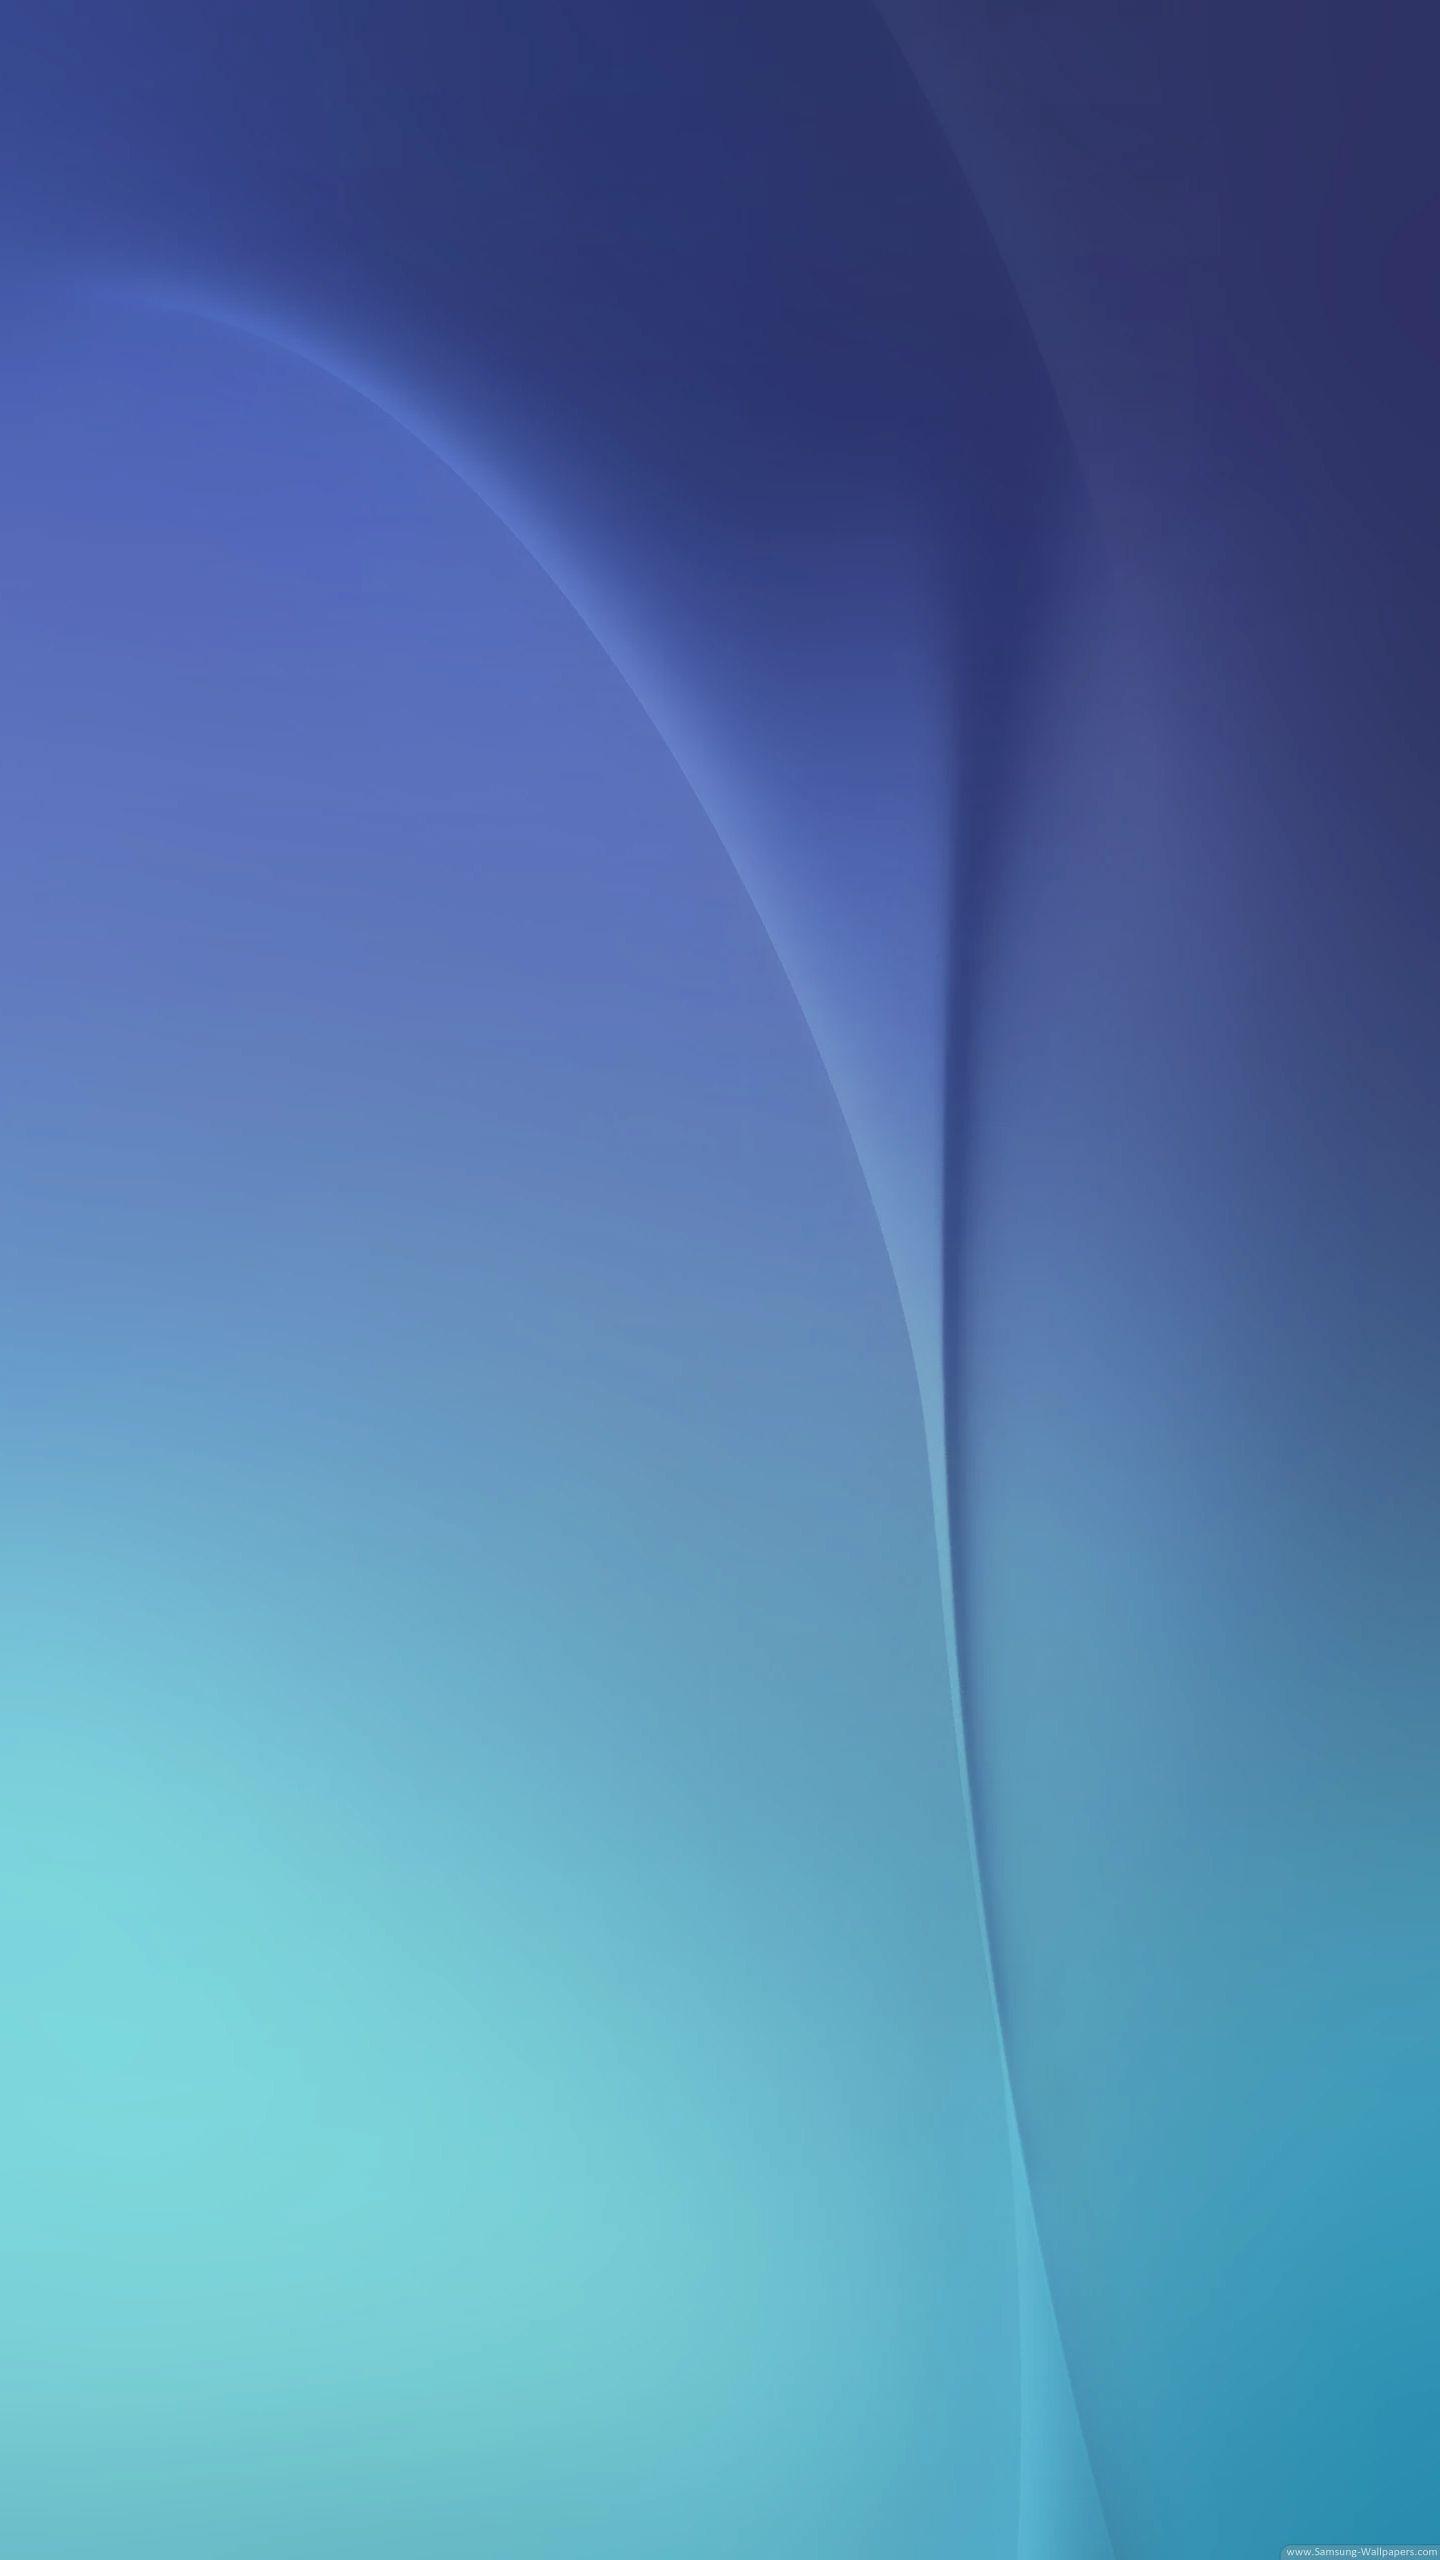 Samsung Galaxy Note 5 Wallpapers - Wallpaper Cave